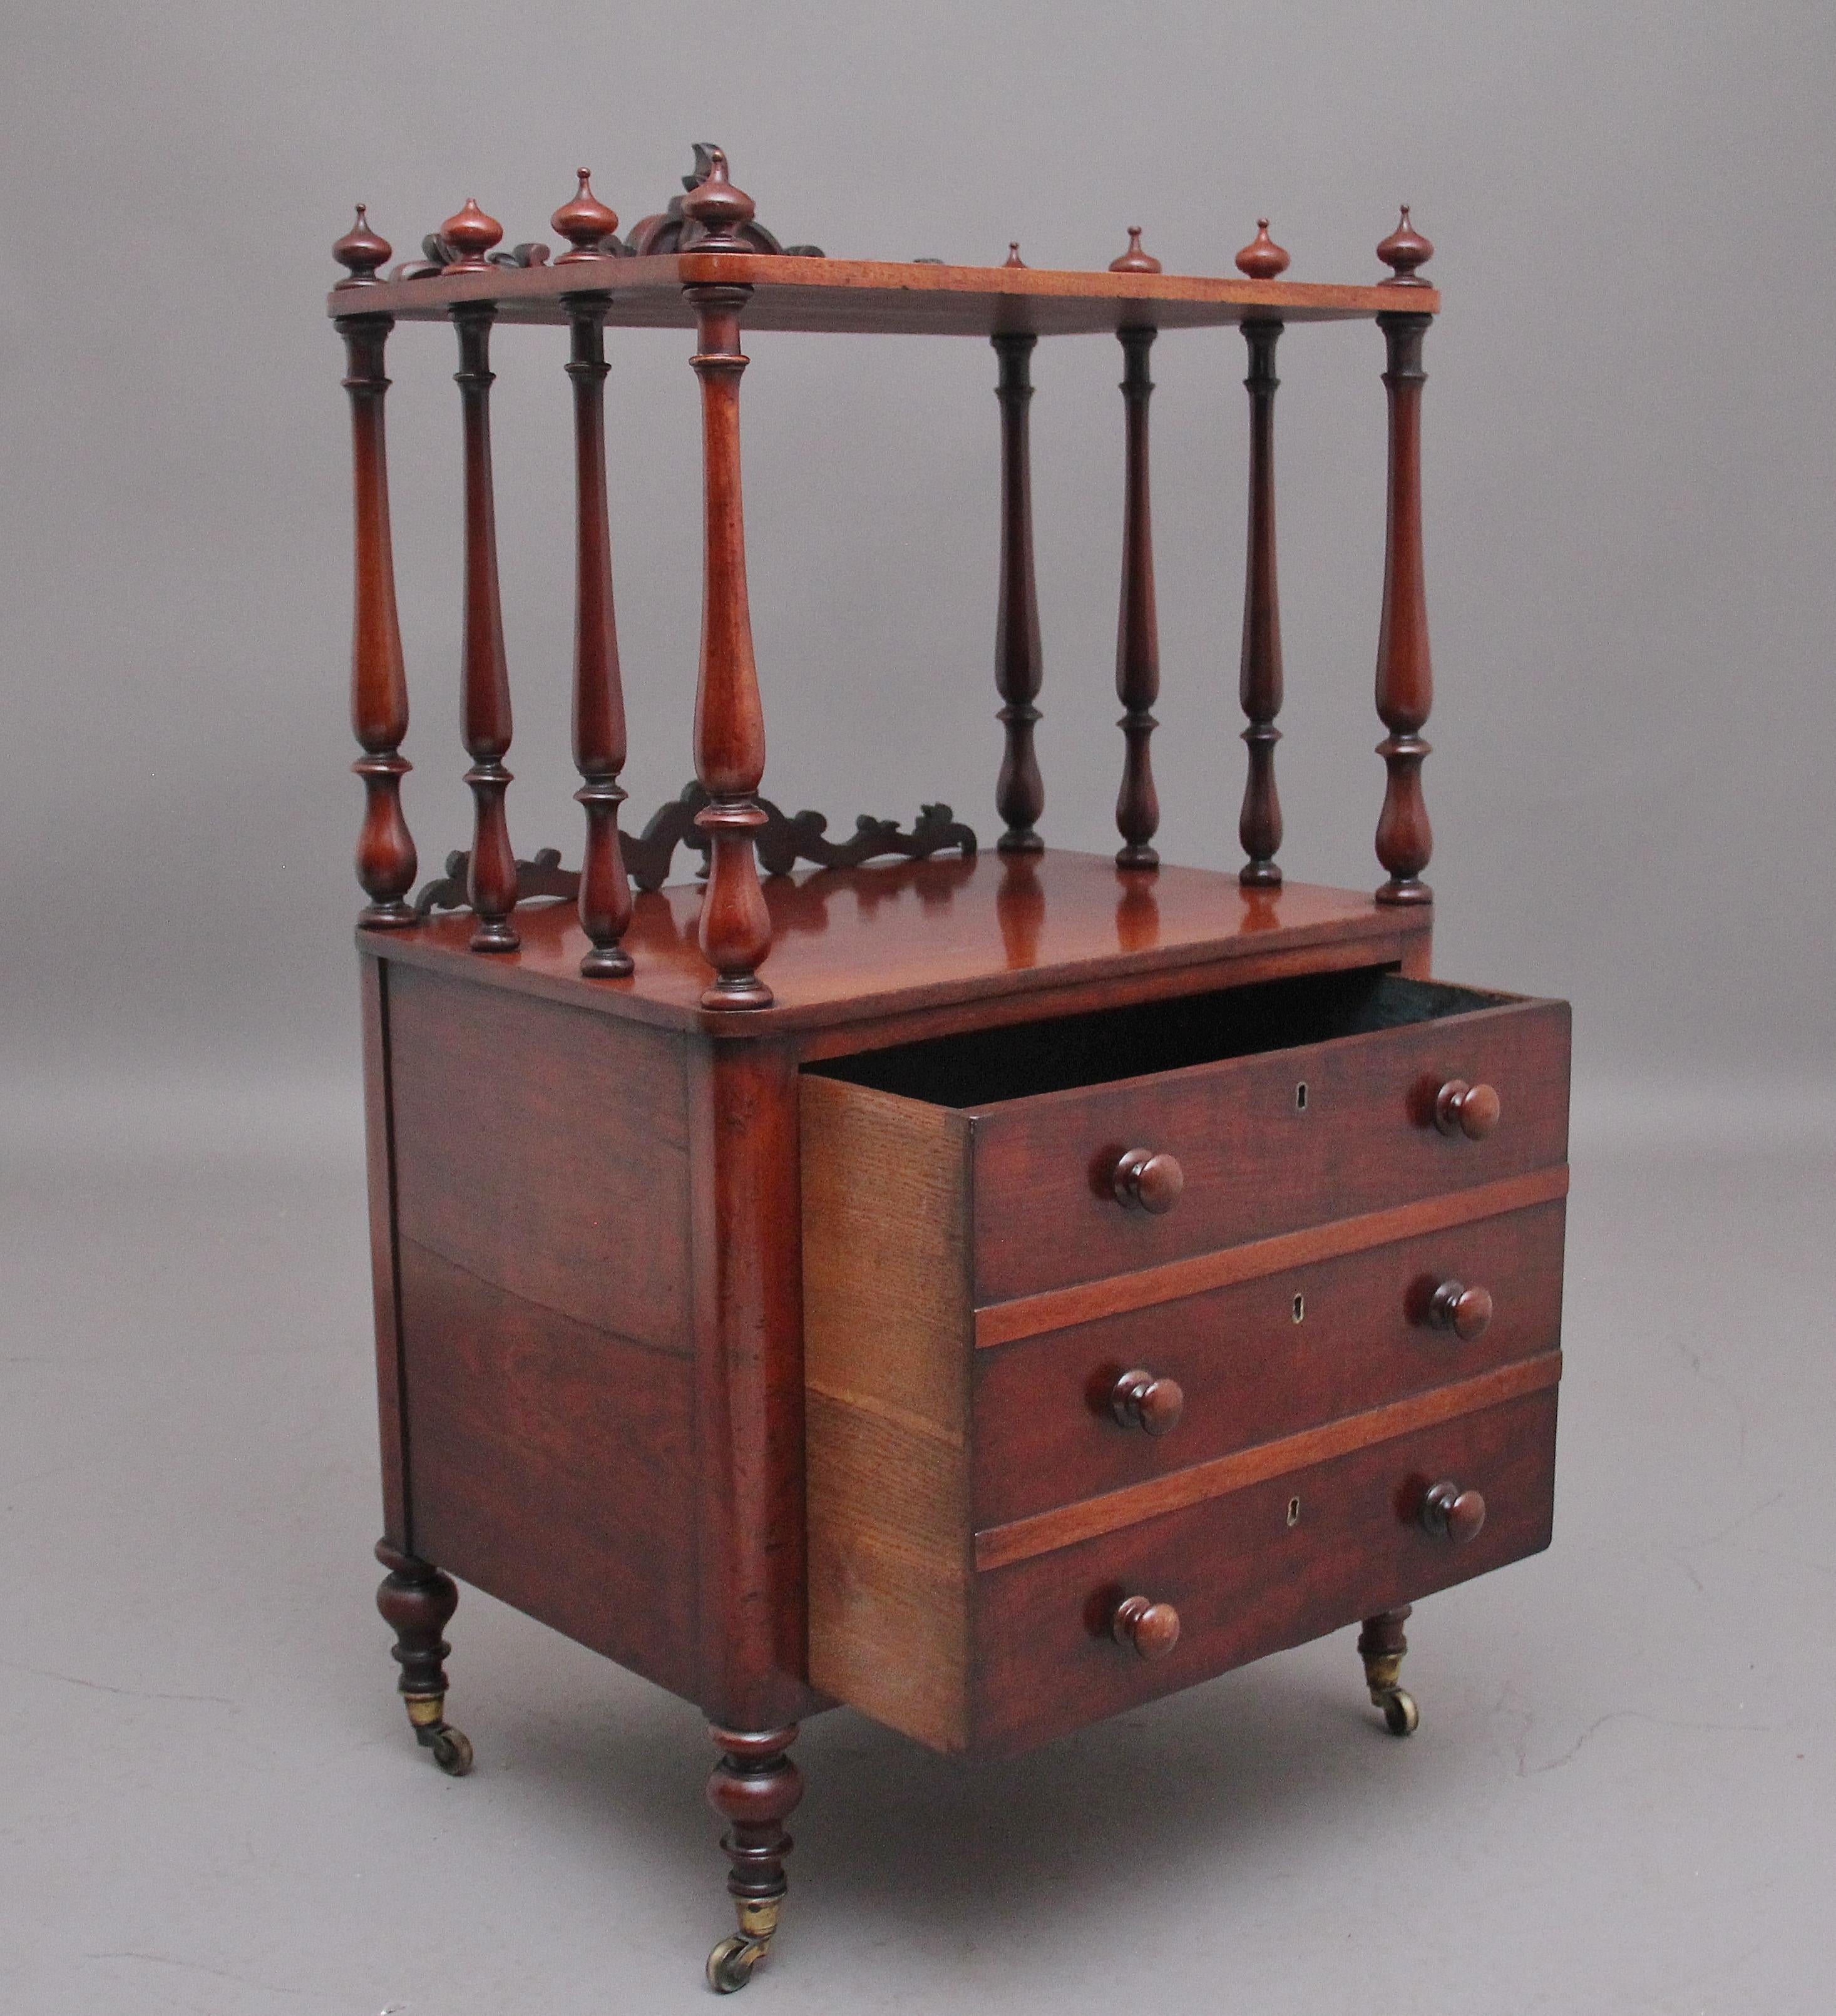 19th Century mahogany whatnot with cellarette, the top shelf supported by elegant turned columns and having decorative turned finials on the top shelf, with bold carved decoration and the same style carved decoration below, the base section having a